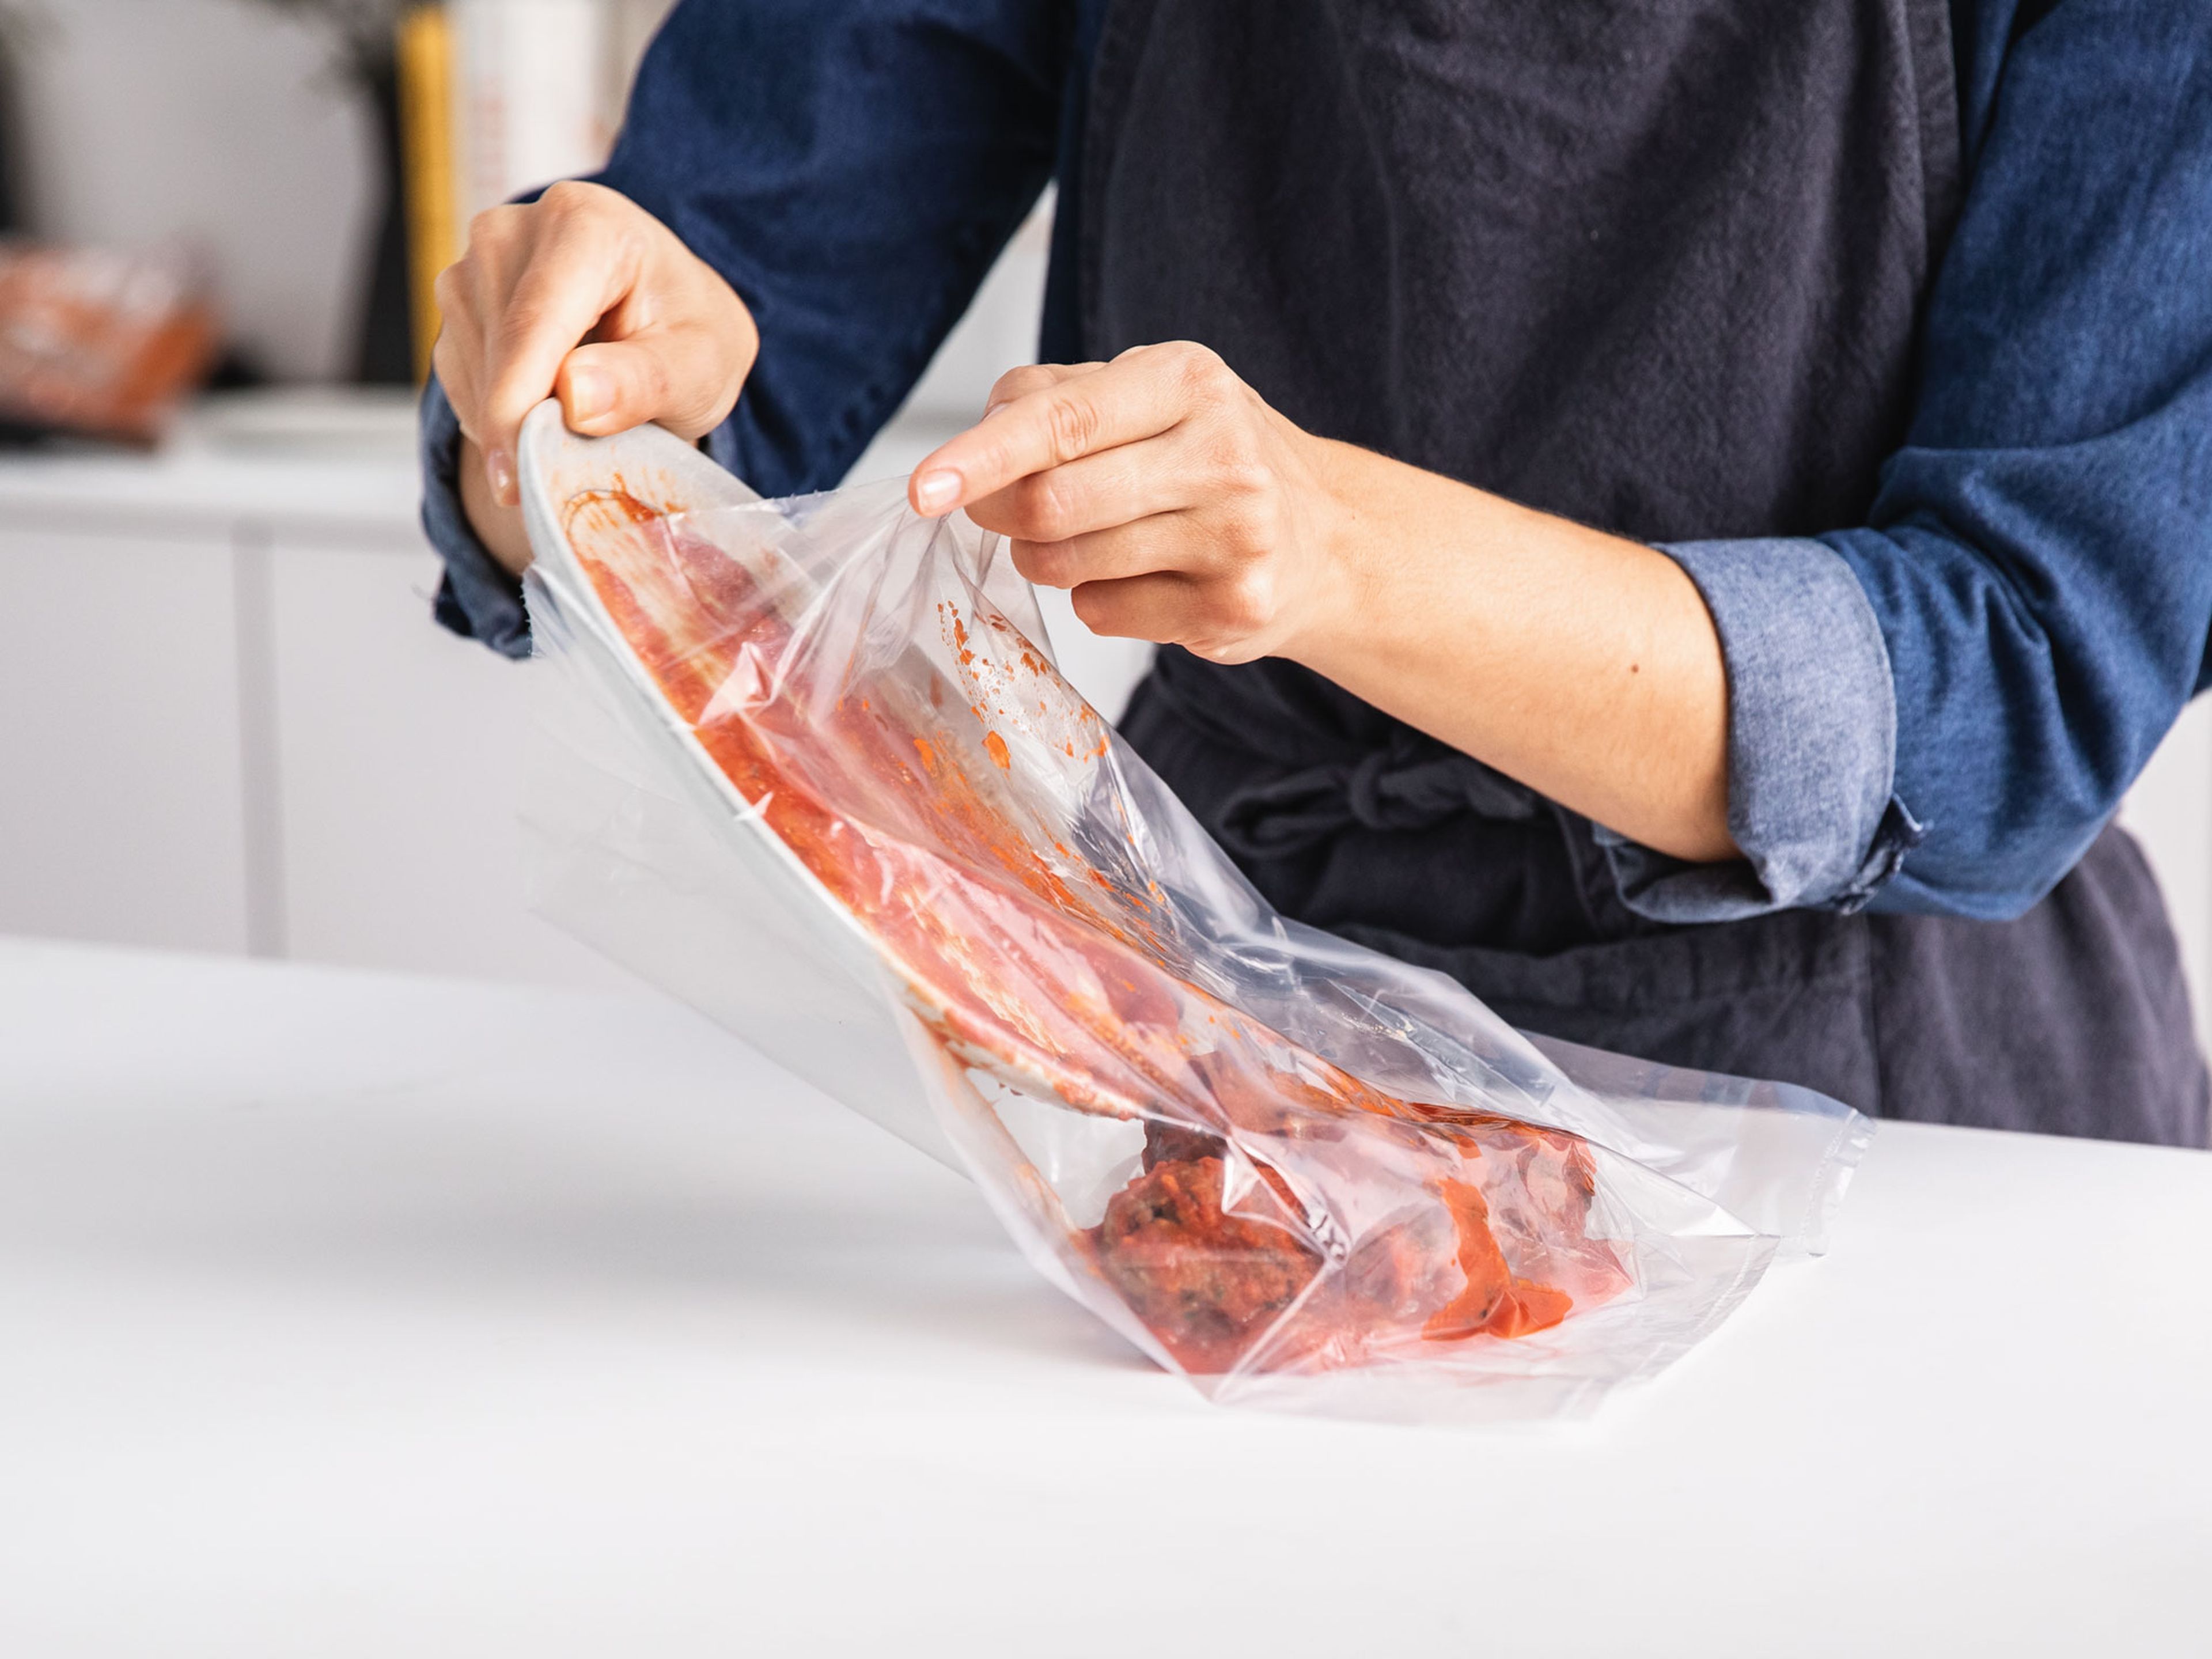 If you have saucy meatballs to freeze, let everything cool then transfer to a freezer bag. Freeze until ready to use.